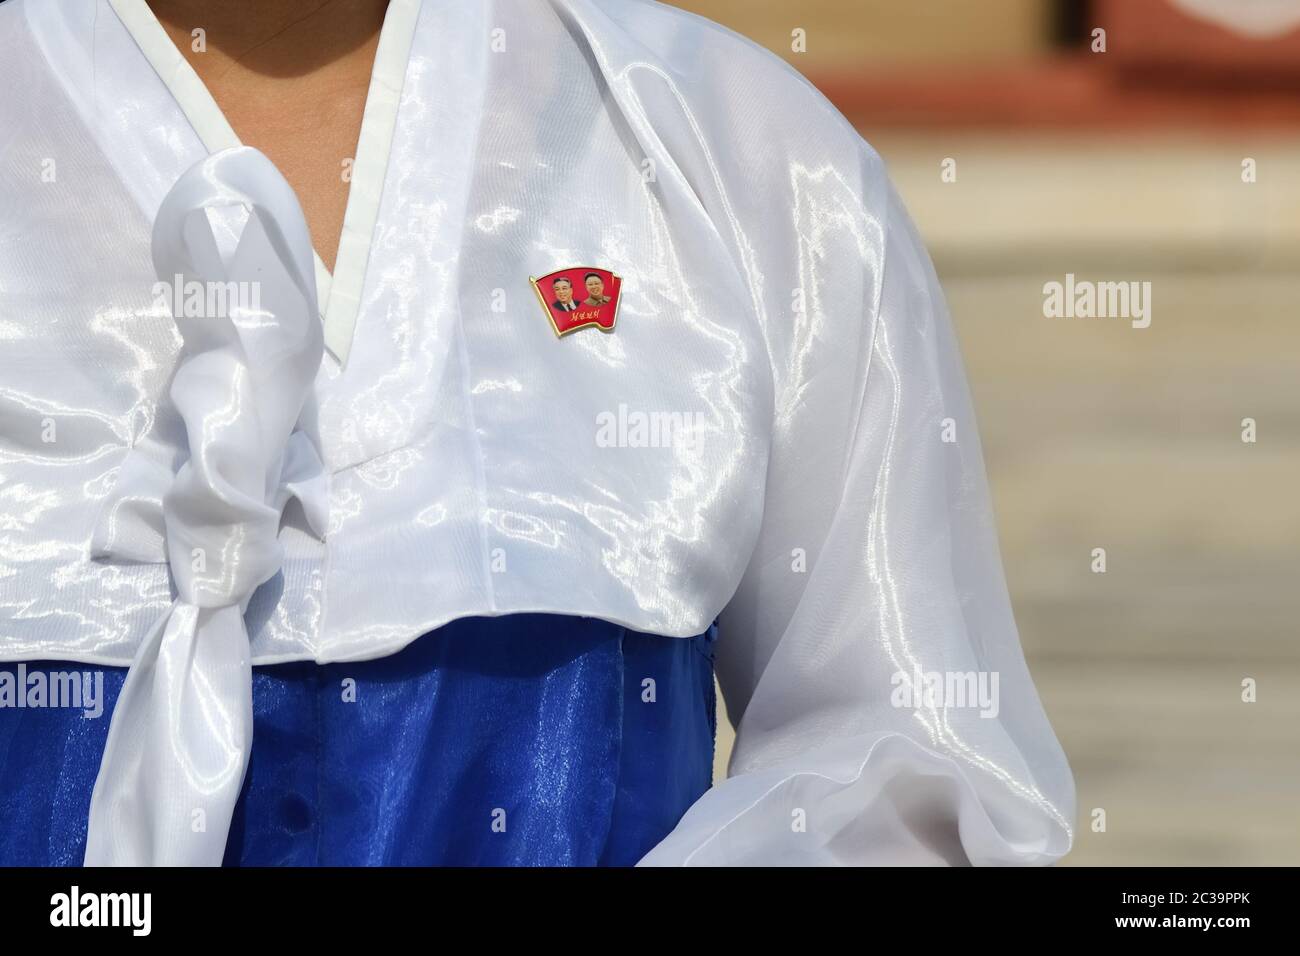 Kaesong, North Korea - May 5, 2019: Close-up of a Kim Il Sung and Kim Jong Il chest badge on the traditional dress hanbok of a North Korean girl membe Stock Photo